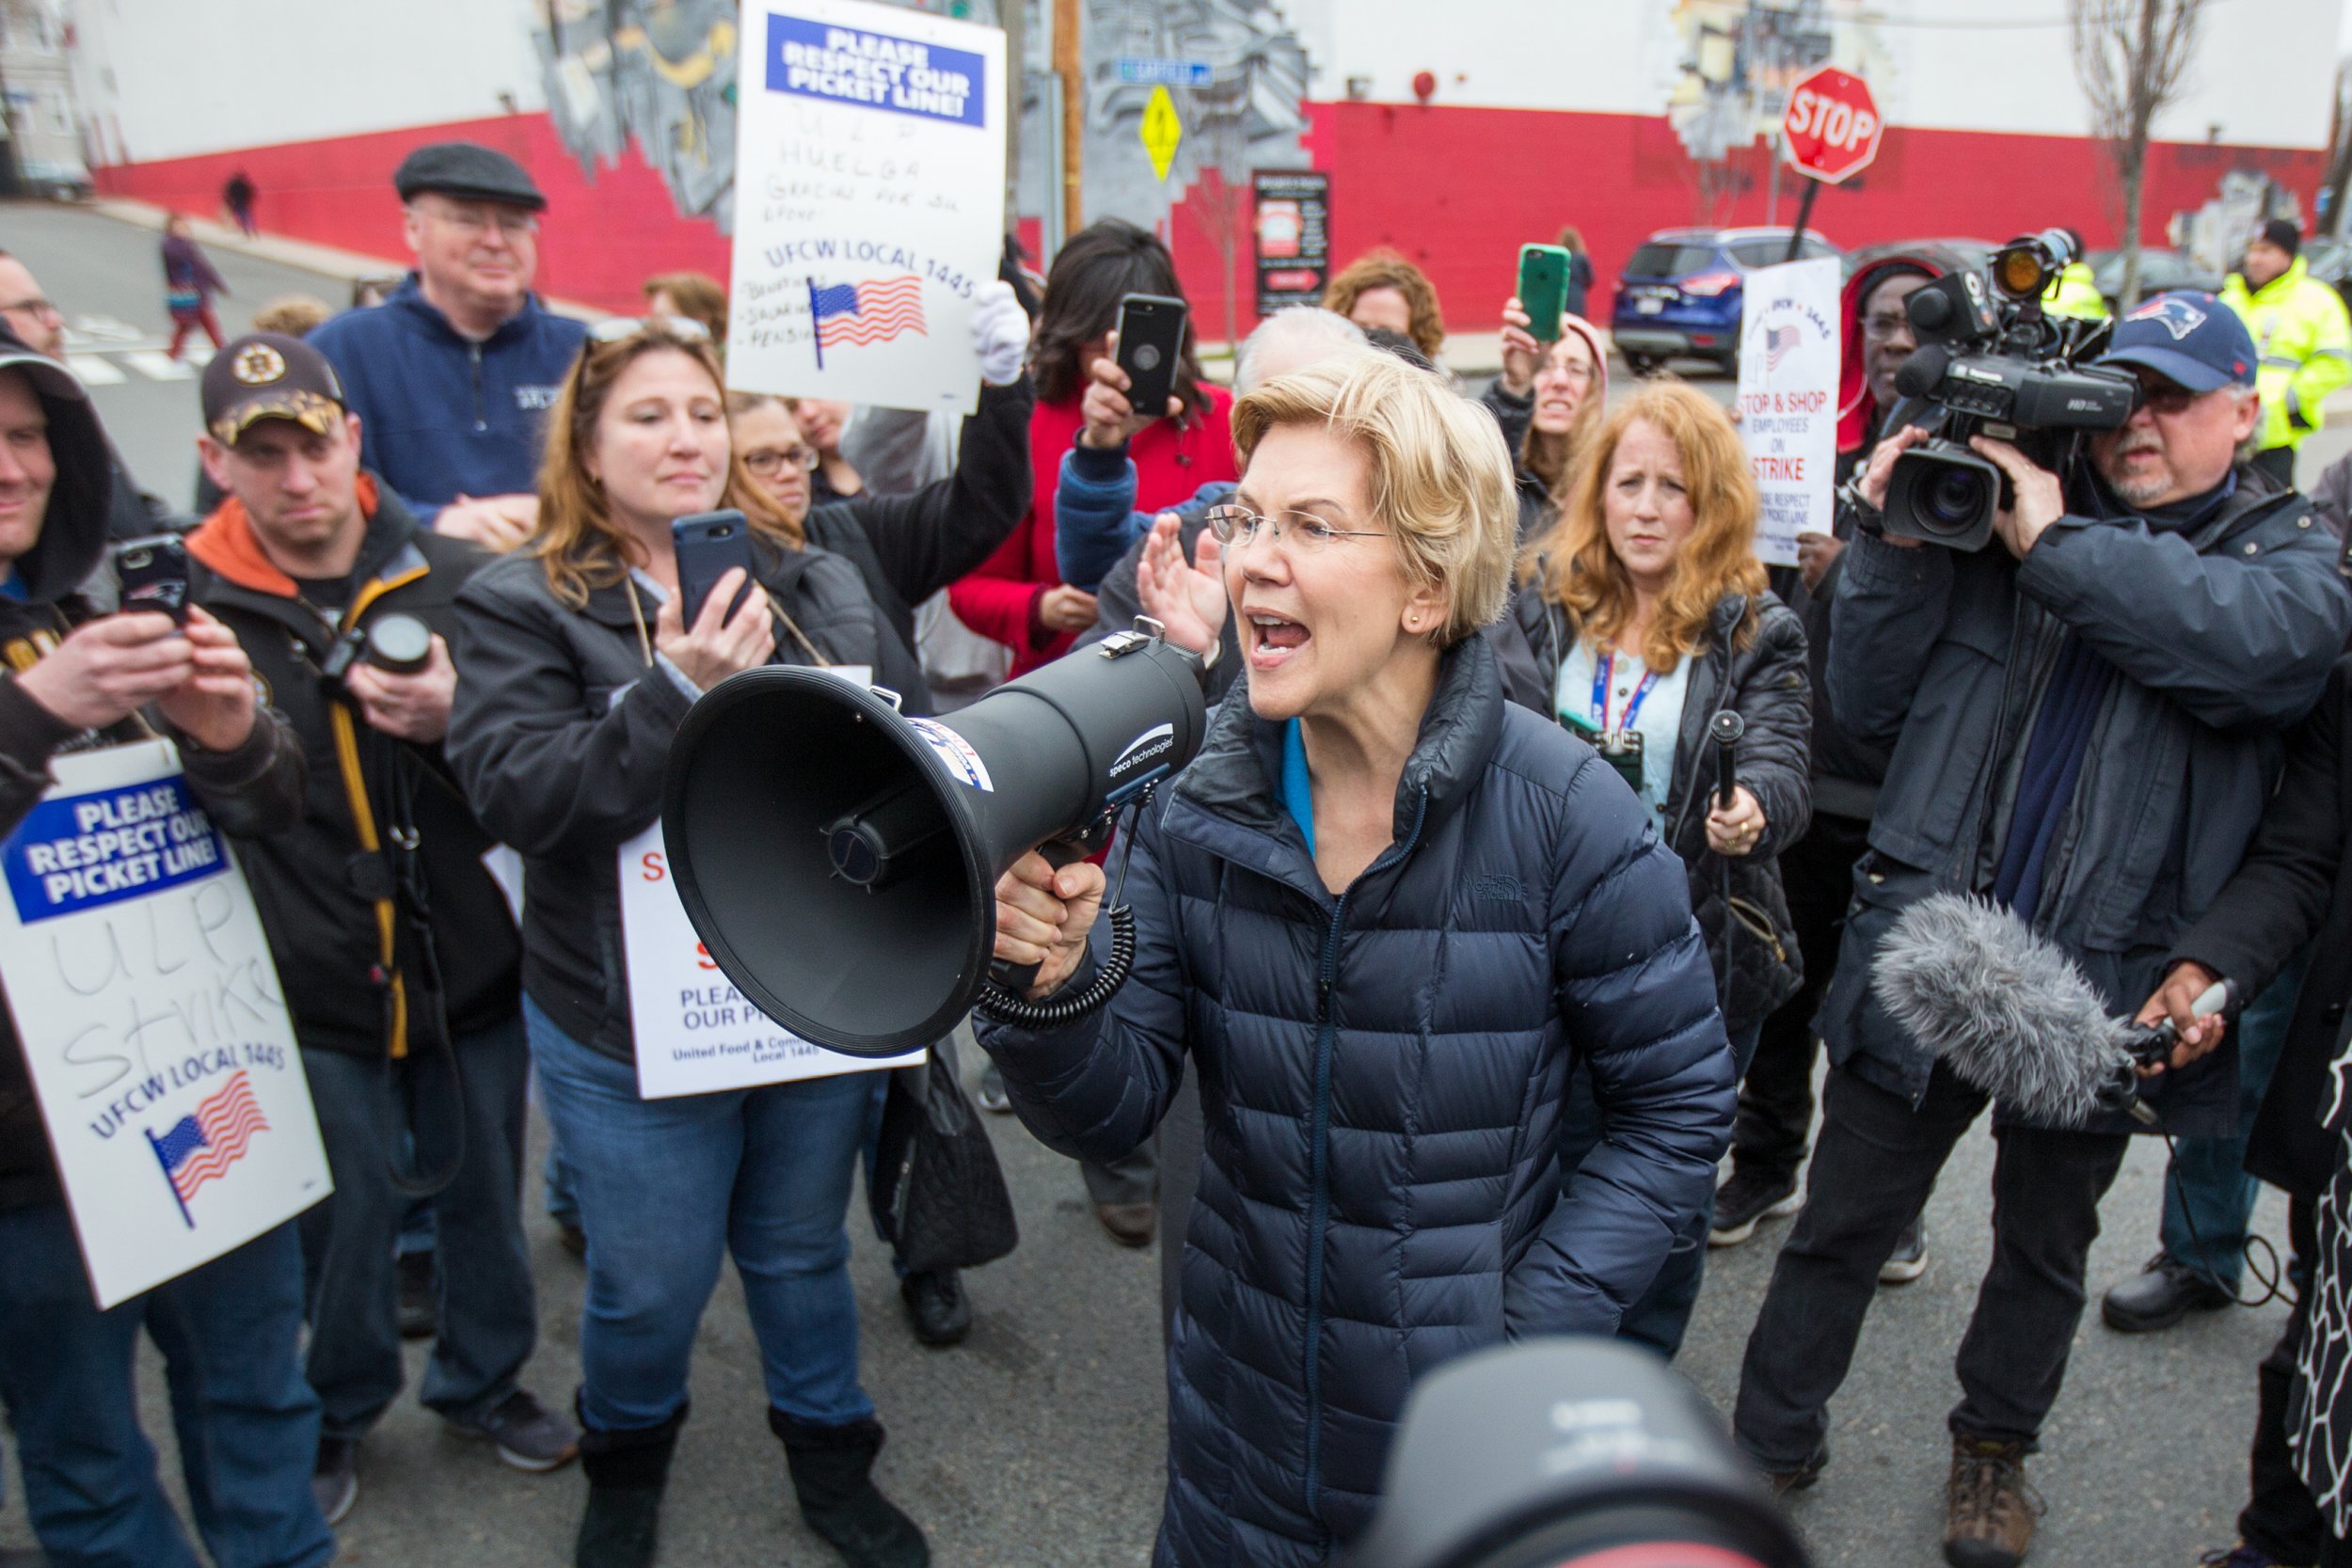 Warren Protests with Stop & Shop Workers